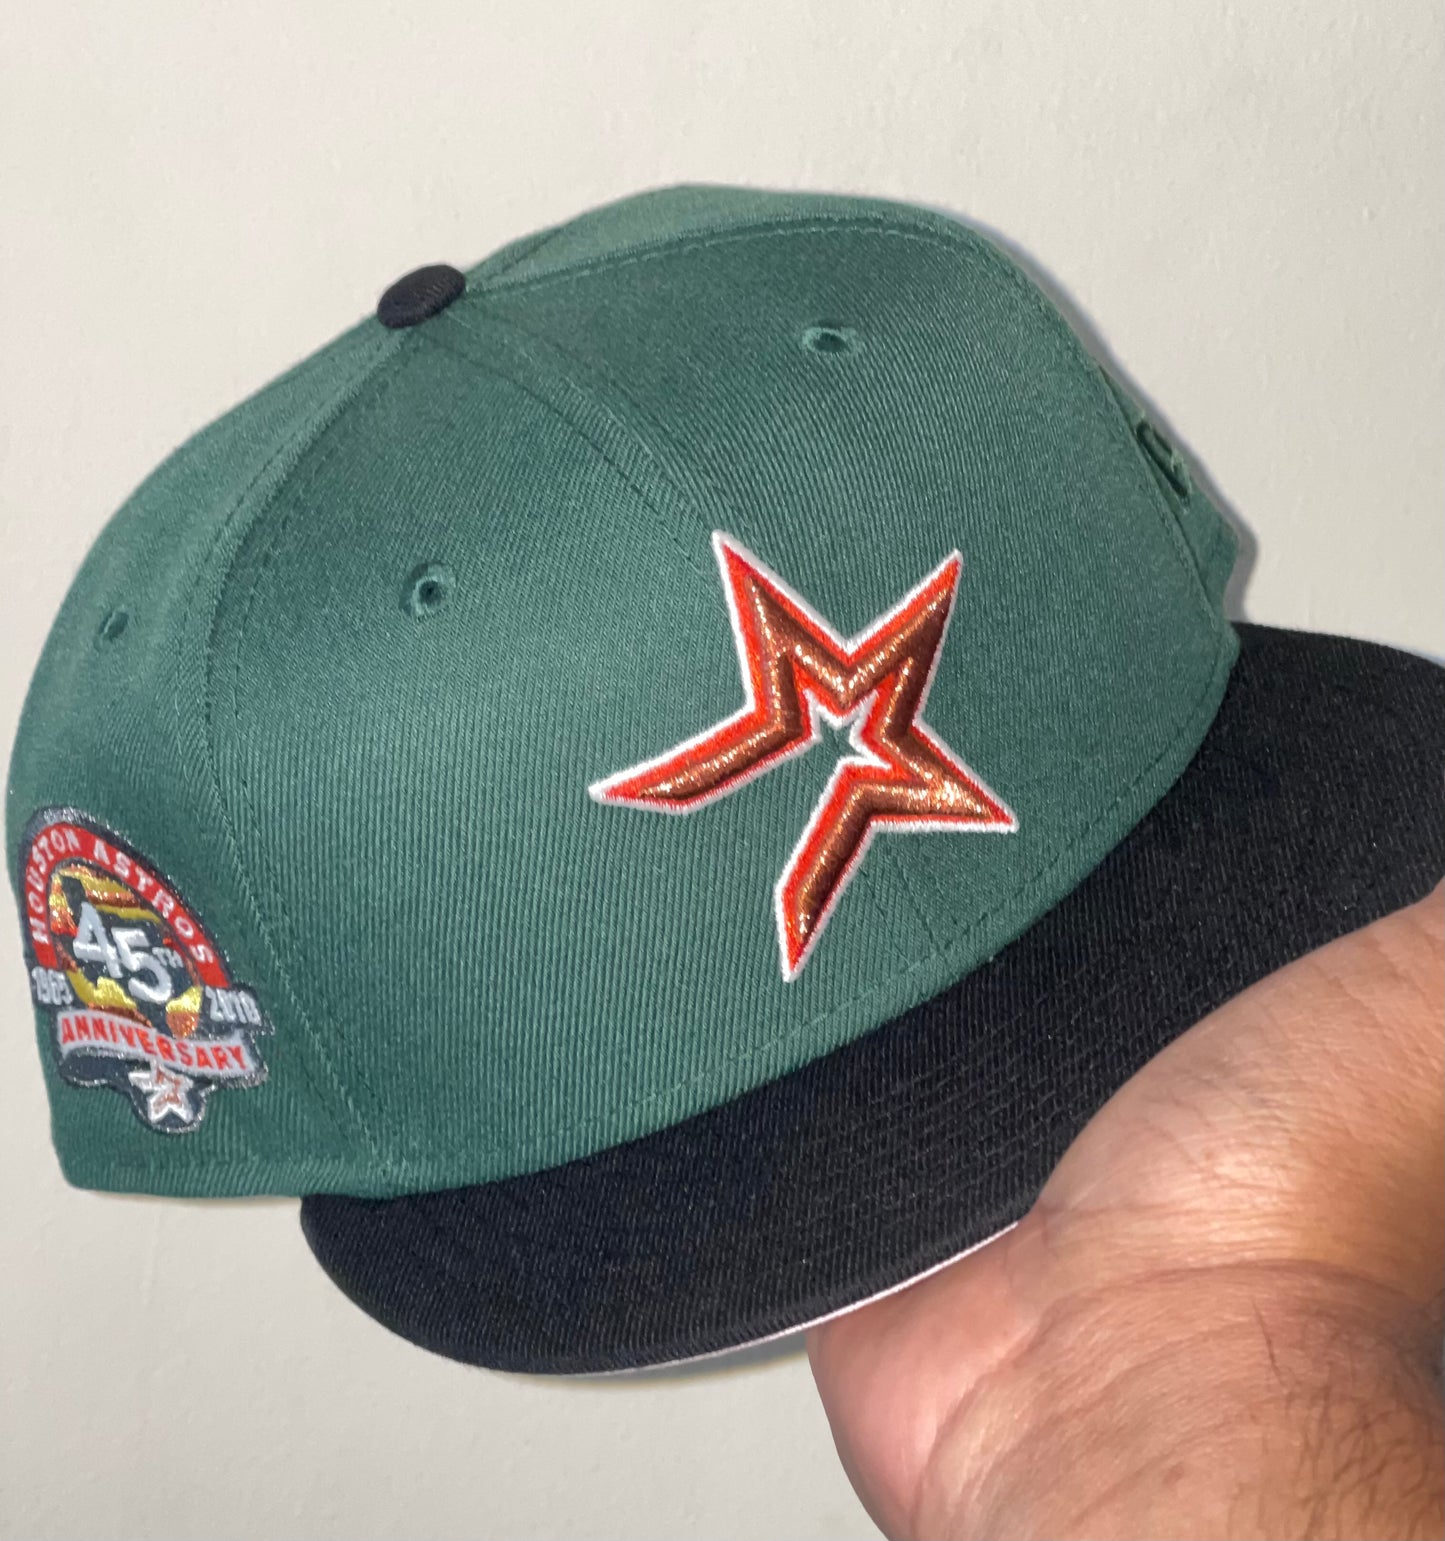 Houston Astros 45th Anniversary Side Patch Fitted Hat New Era 5950 (Green/Black/Copper/Pink)